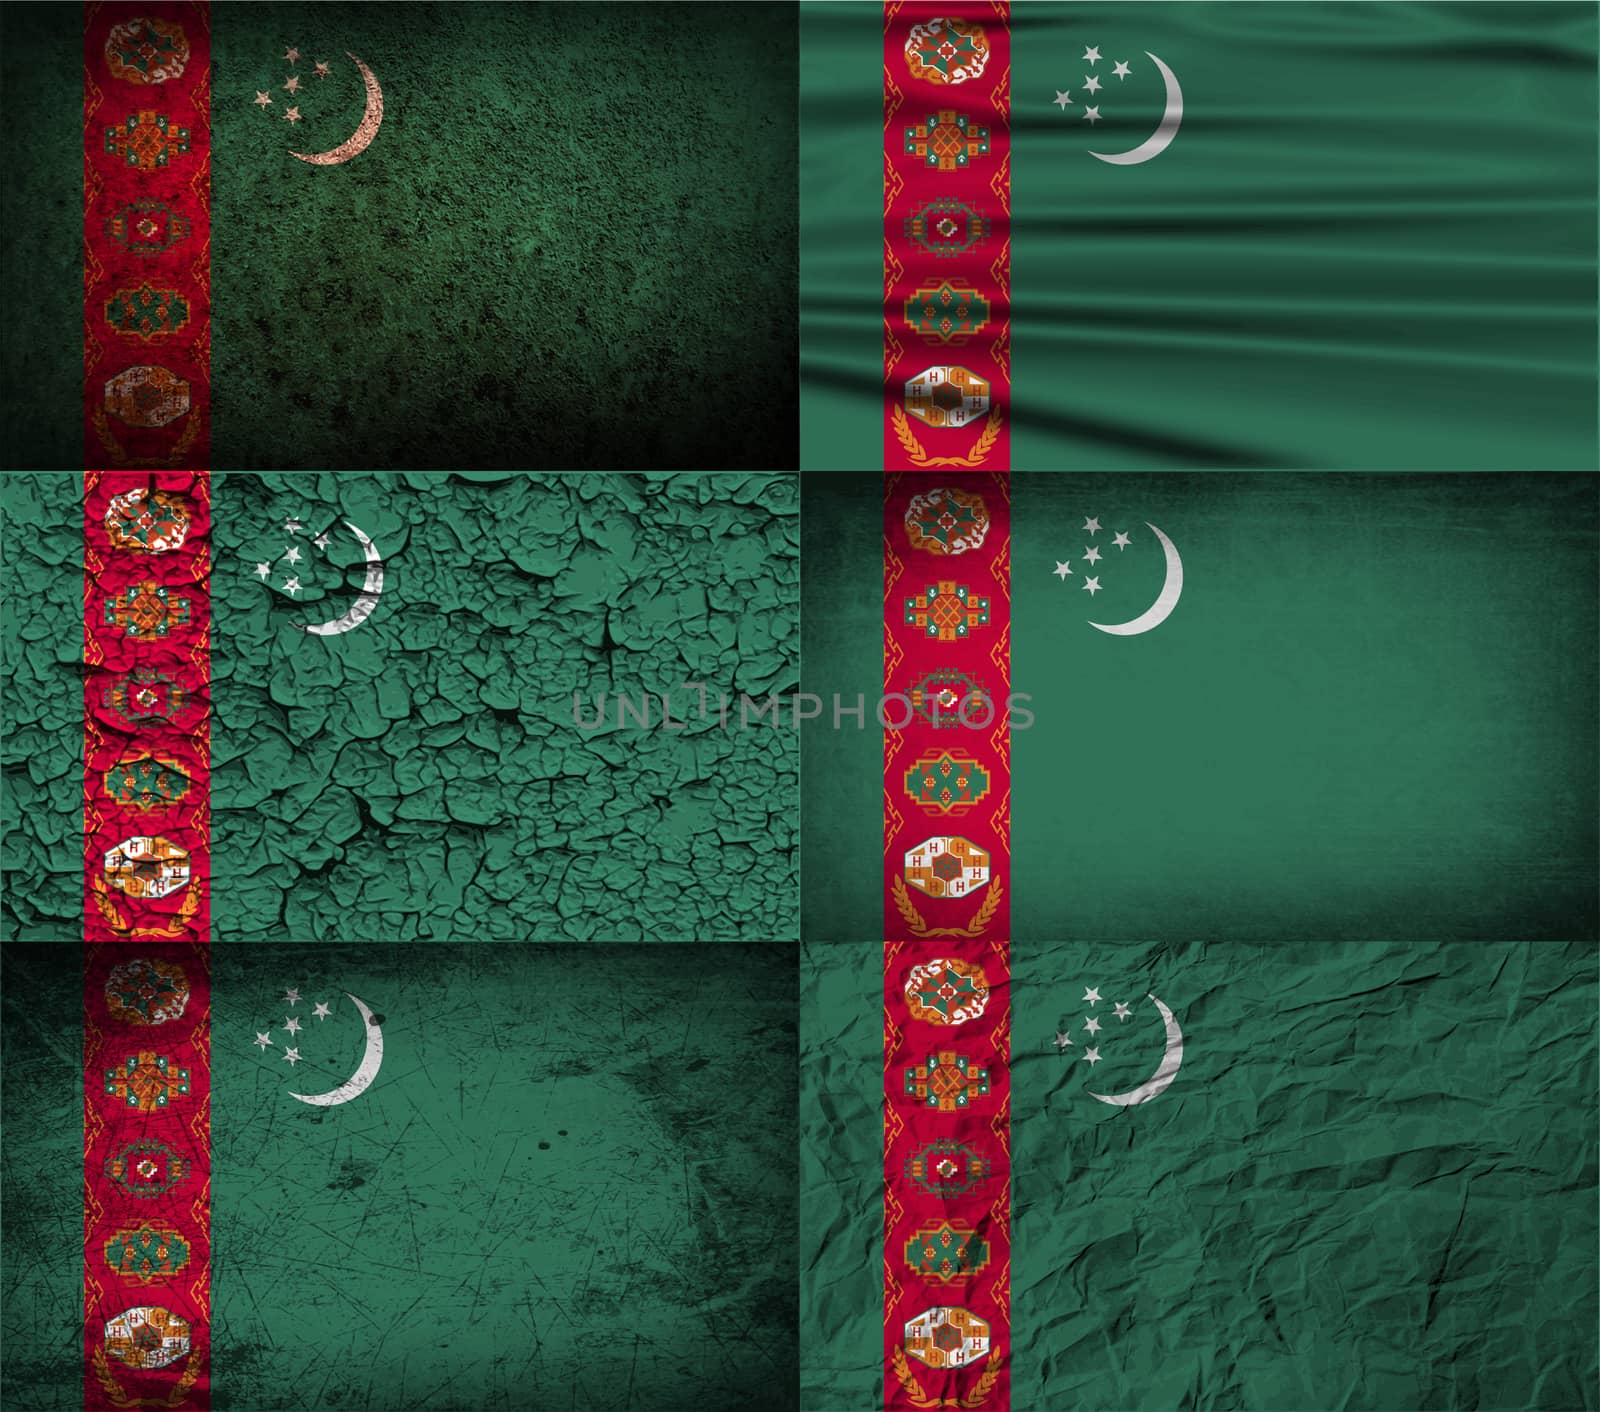 Flag of Turkmenistan with old texture.  illustration